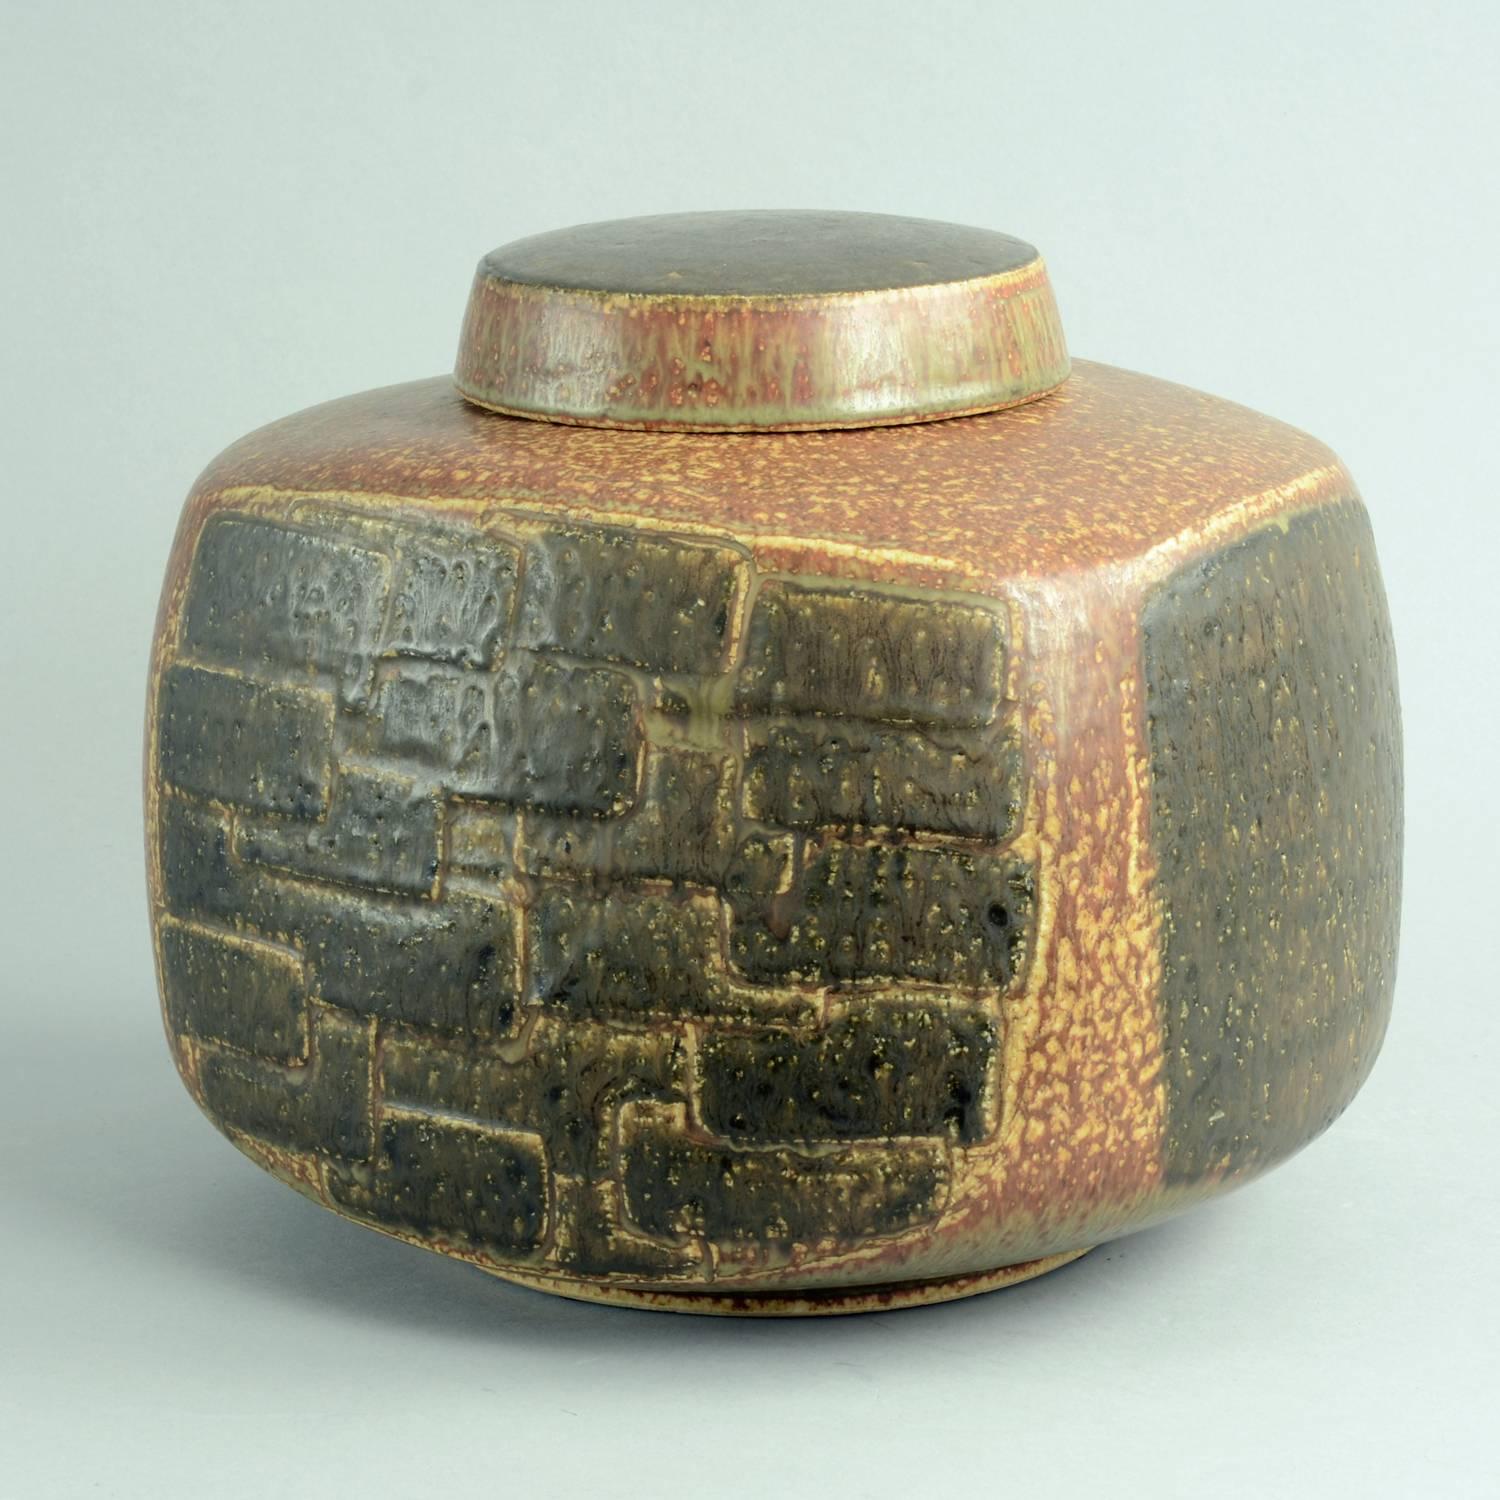 Eva Staehr Nielsen for Saxbo, Denmark

Large lidded vessel in chamotte stoneware with mottled reddish brown and dark brown glaze, pattern of overlapping rectangles in light relief to front and back, circa 1960s.
Measures: Height 9 1/2